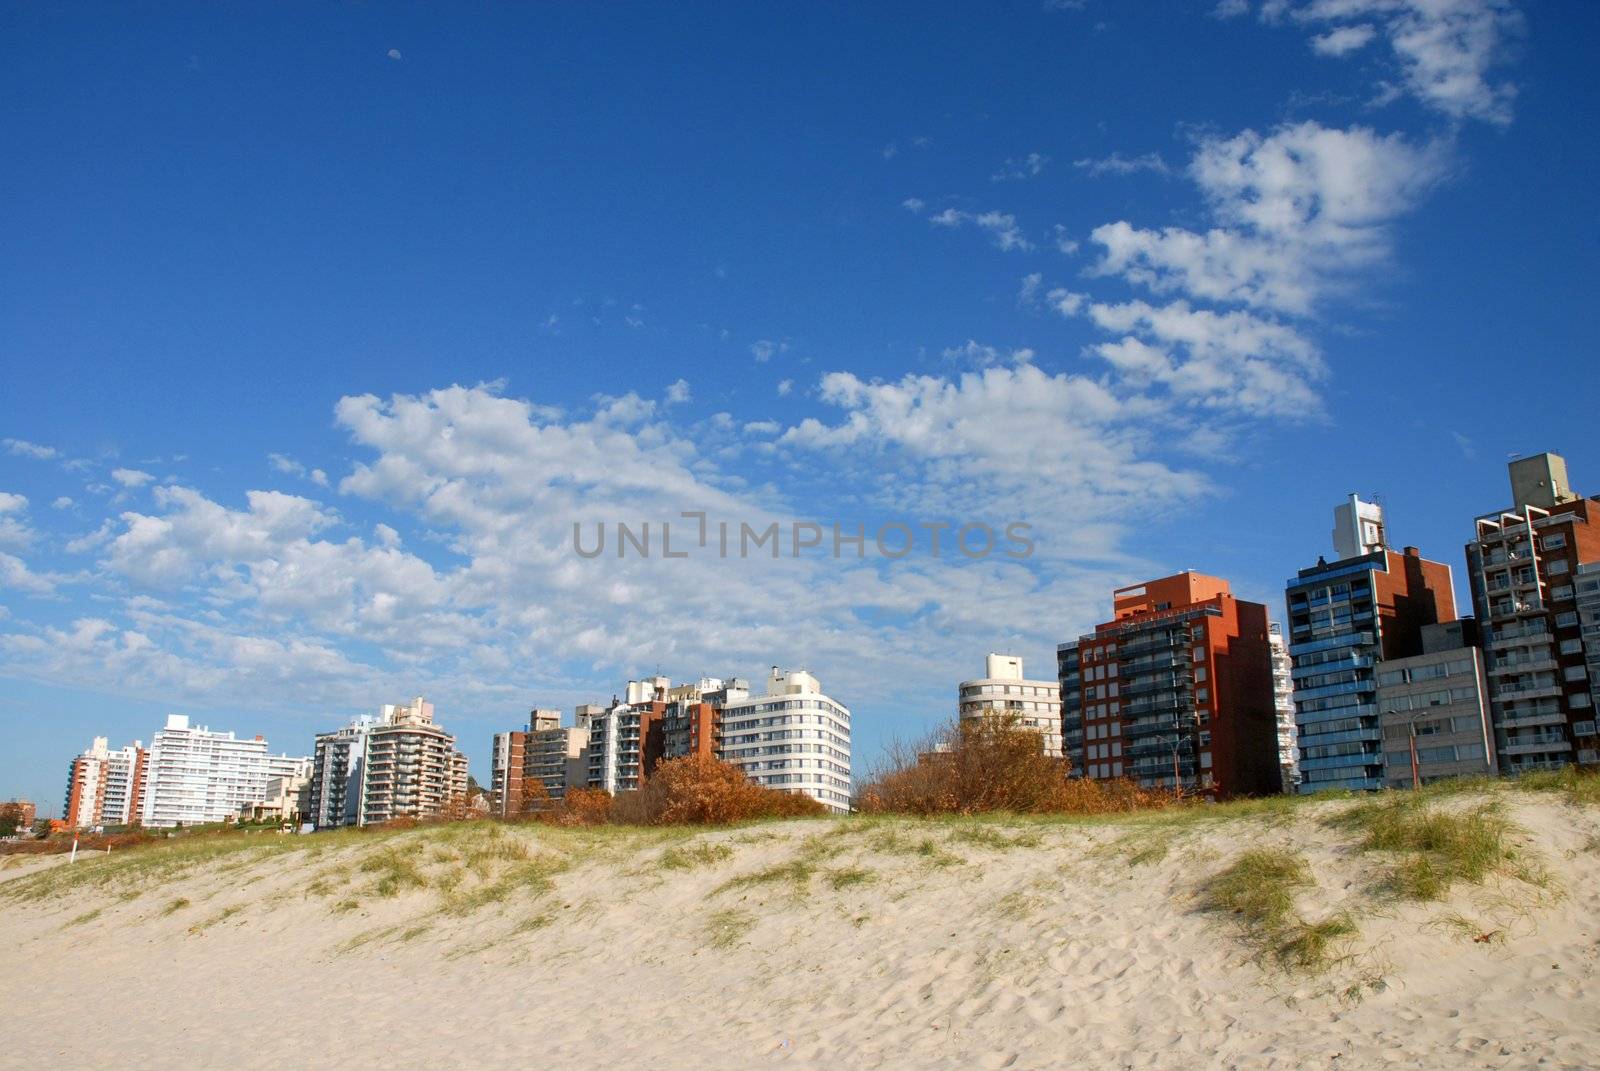 Buildings a sand dune beach panorma by cienpies